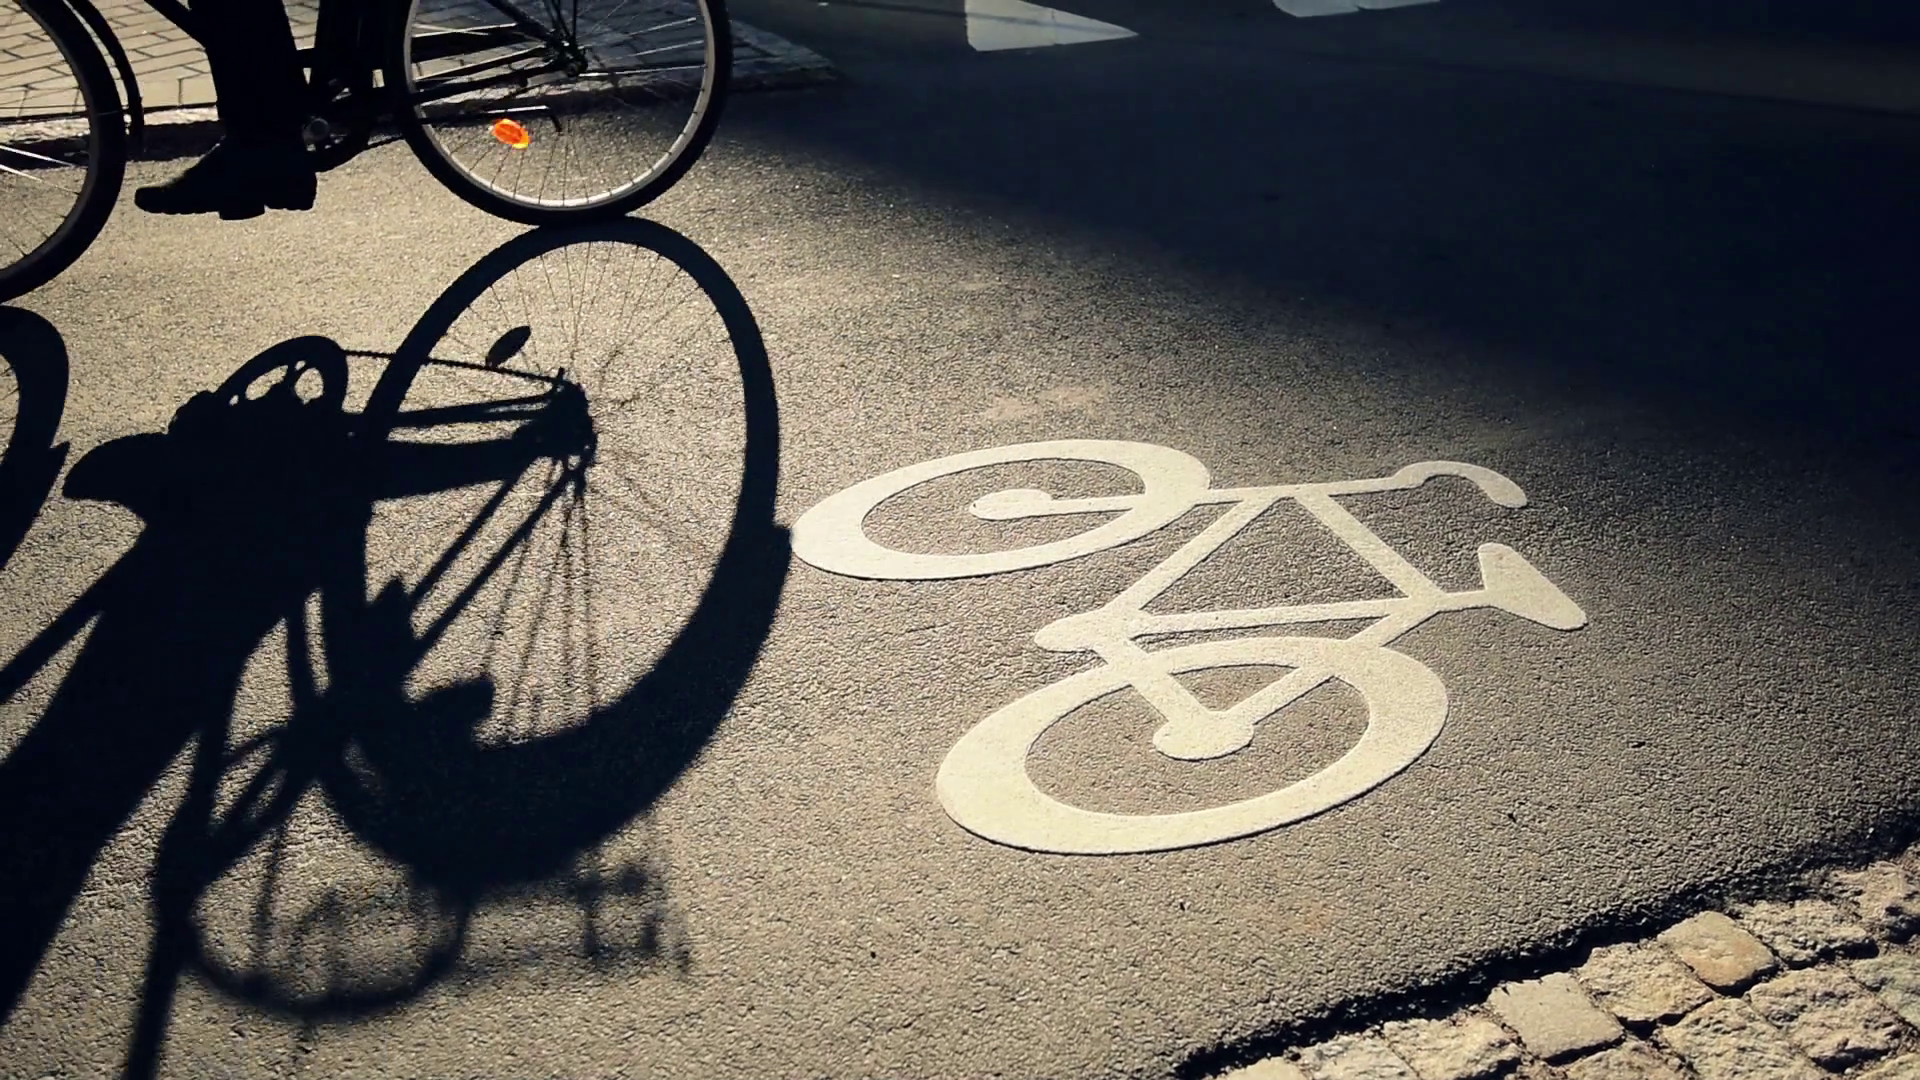 Bicycle ride on urban lane in sunset, shadow of unrecognizable ...